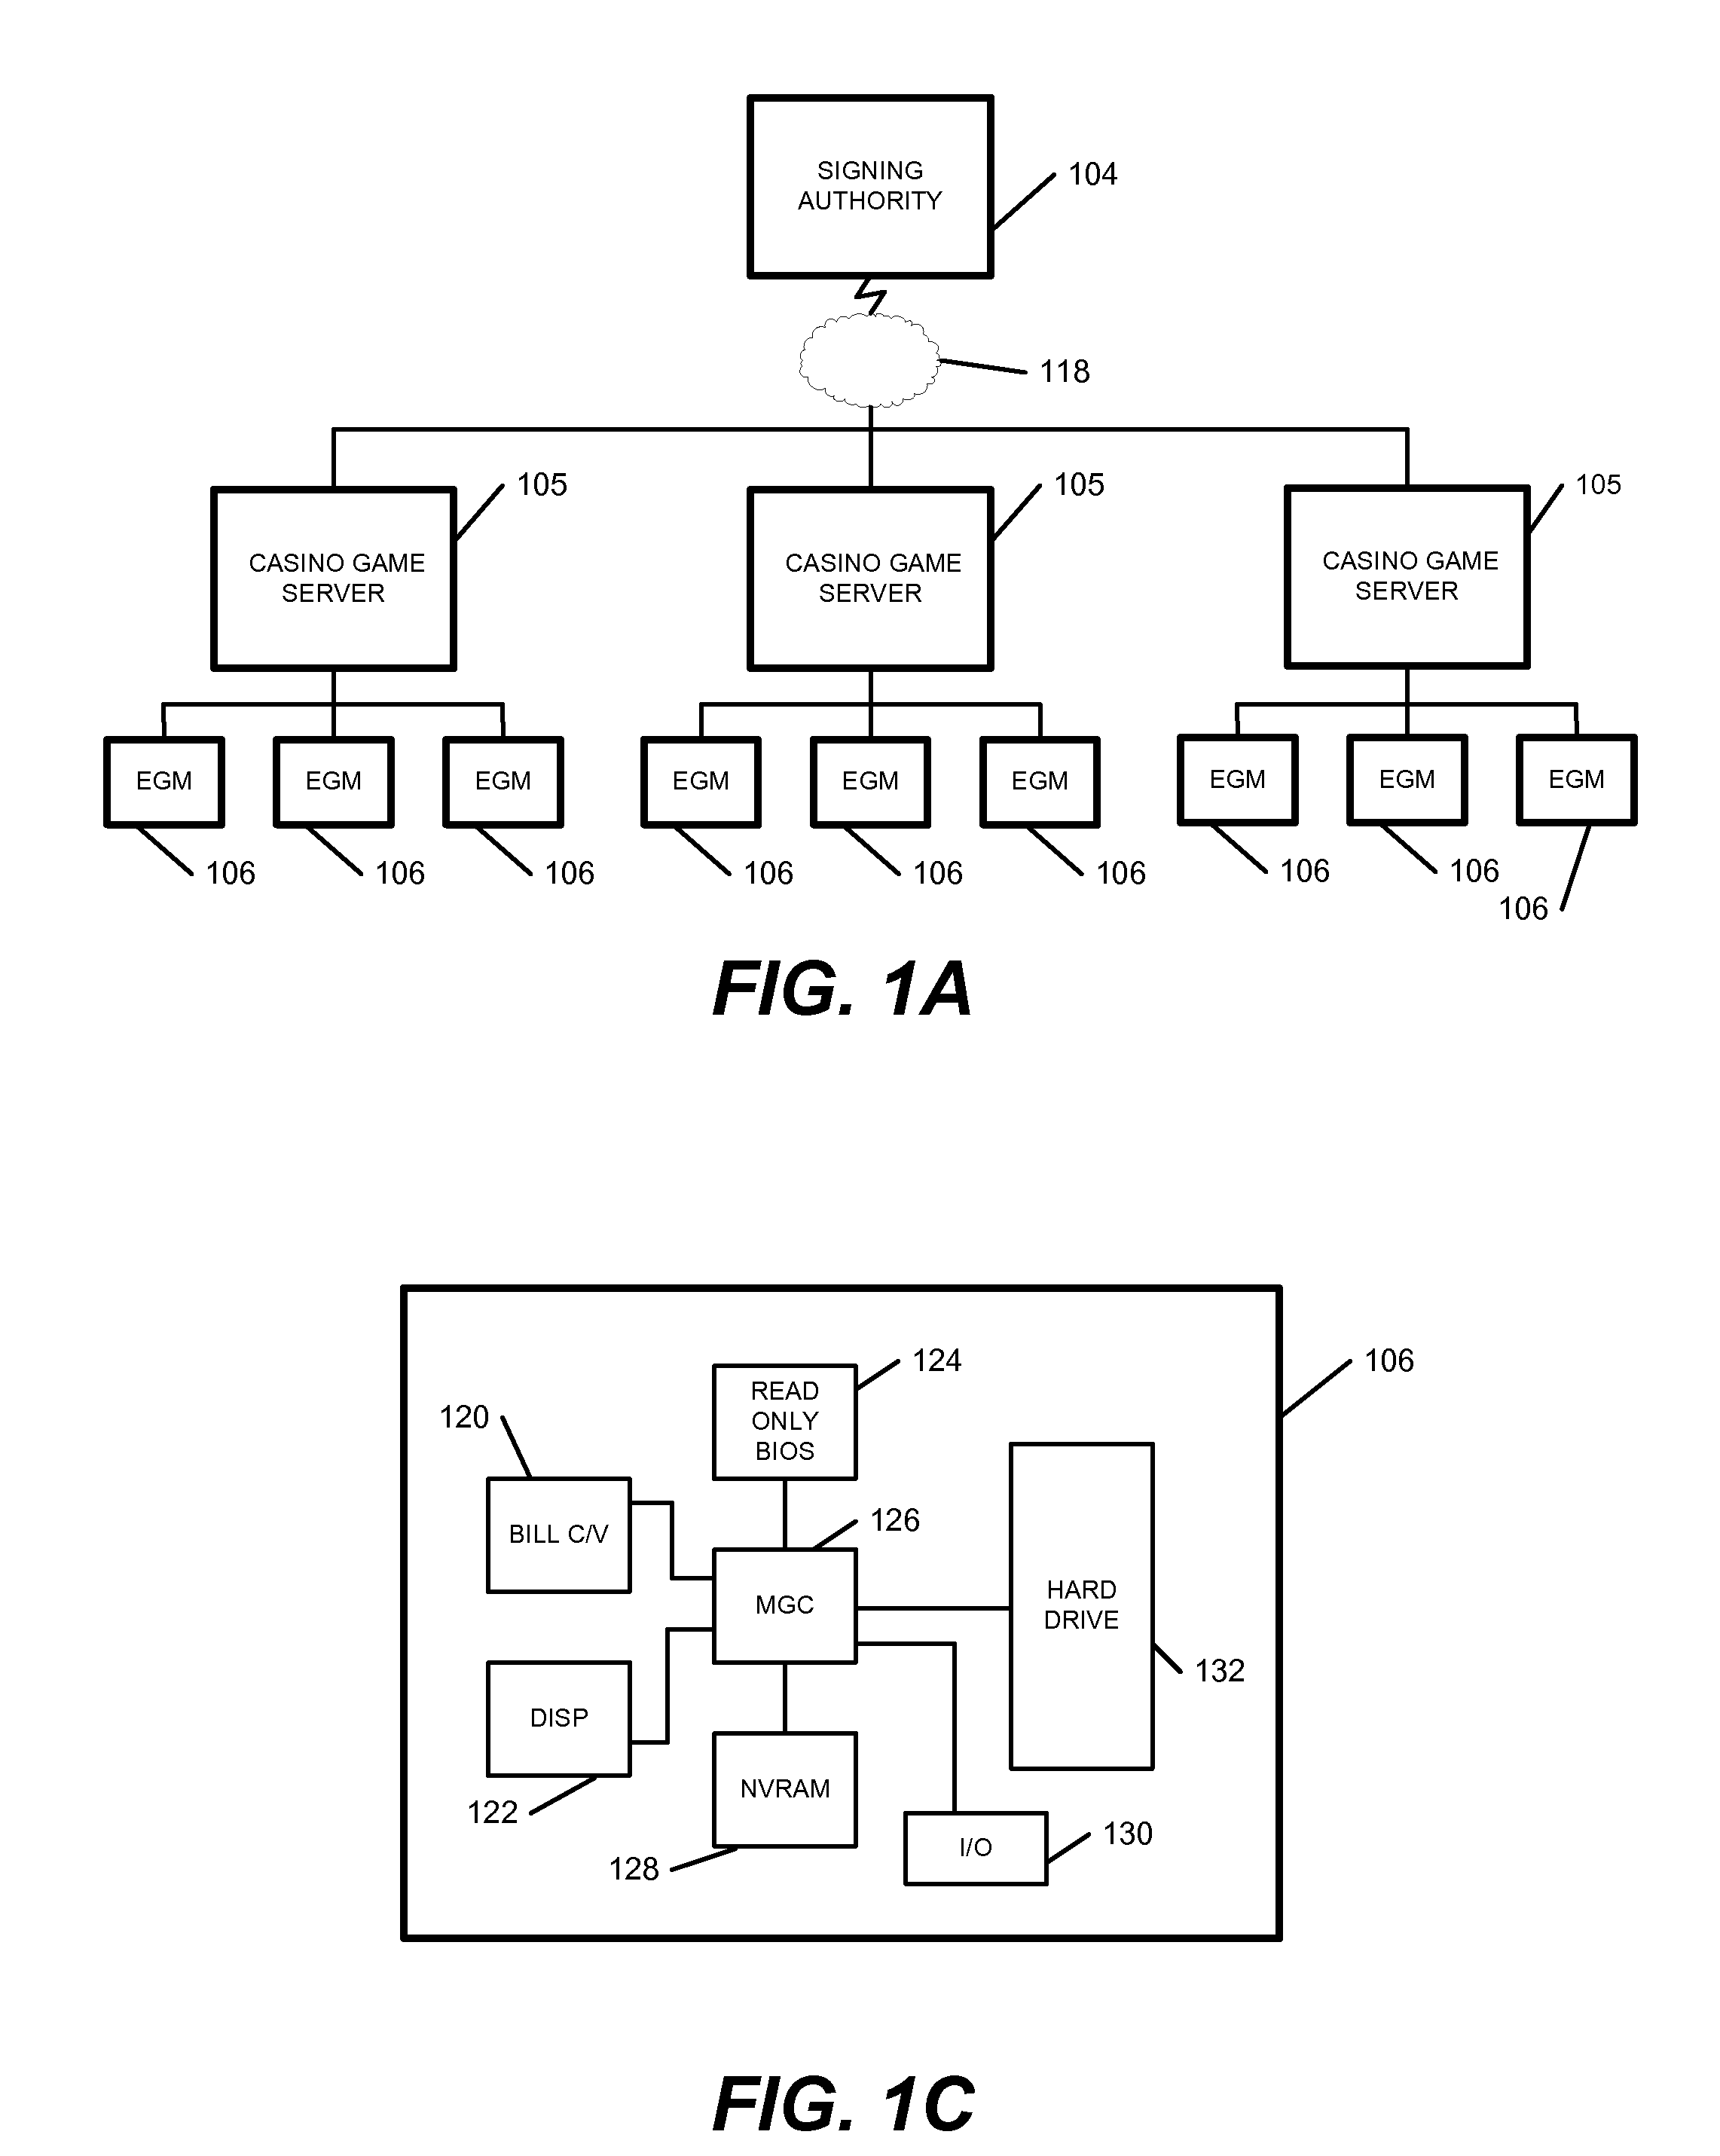 Egm authentication mechanism using multiple key pairs at the BIOS with pki